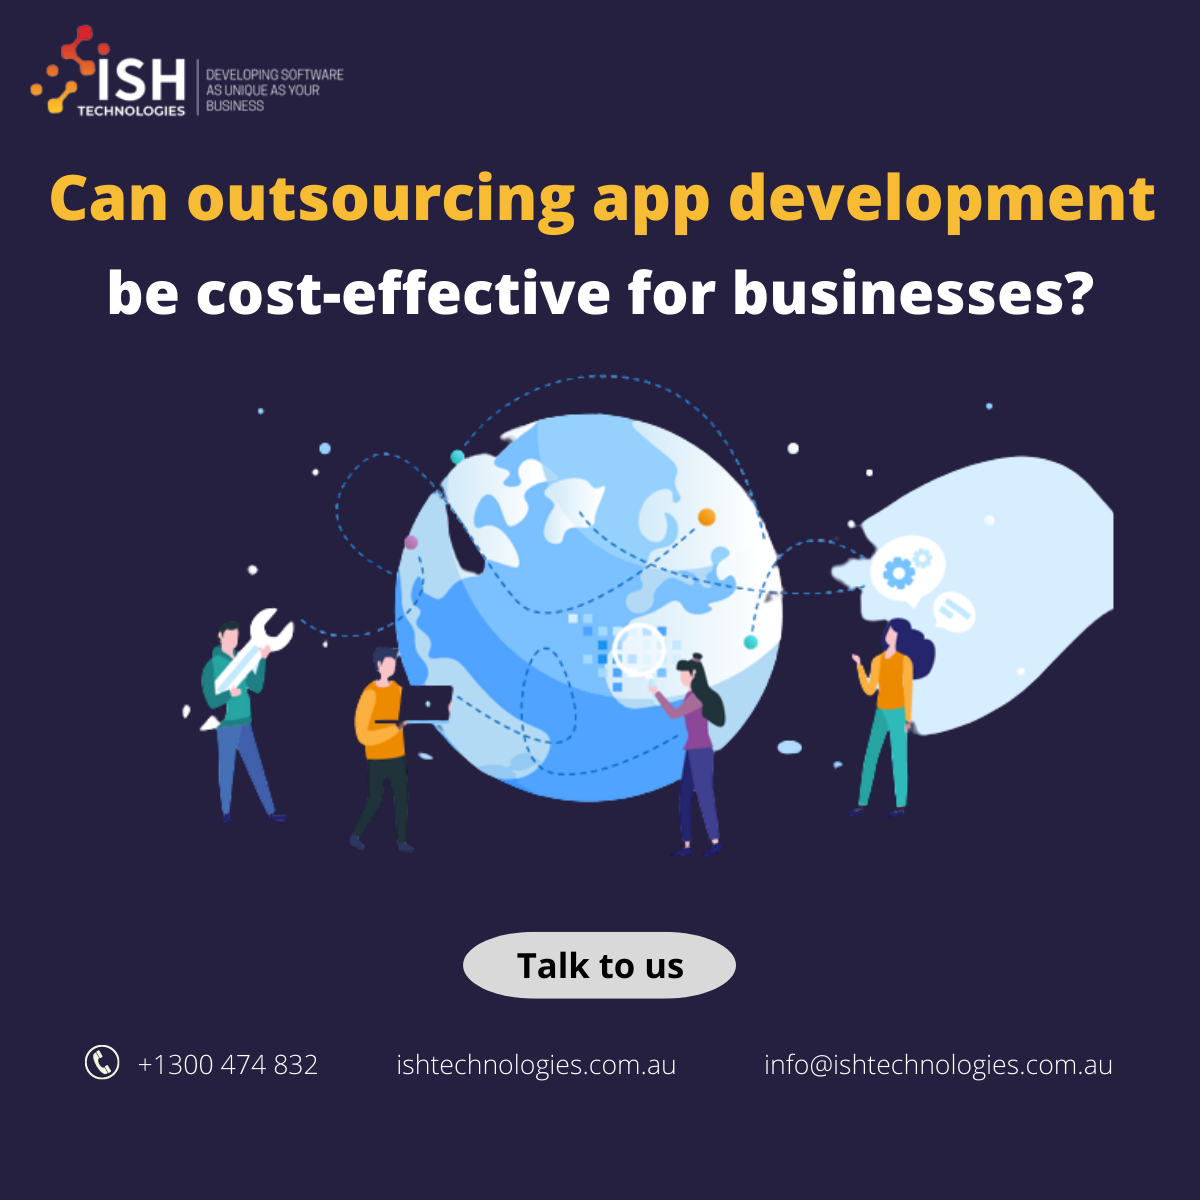 Can-outsourcing-app-development-be-cost-effective-for-businesses